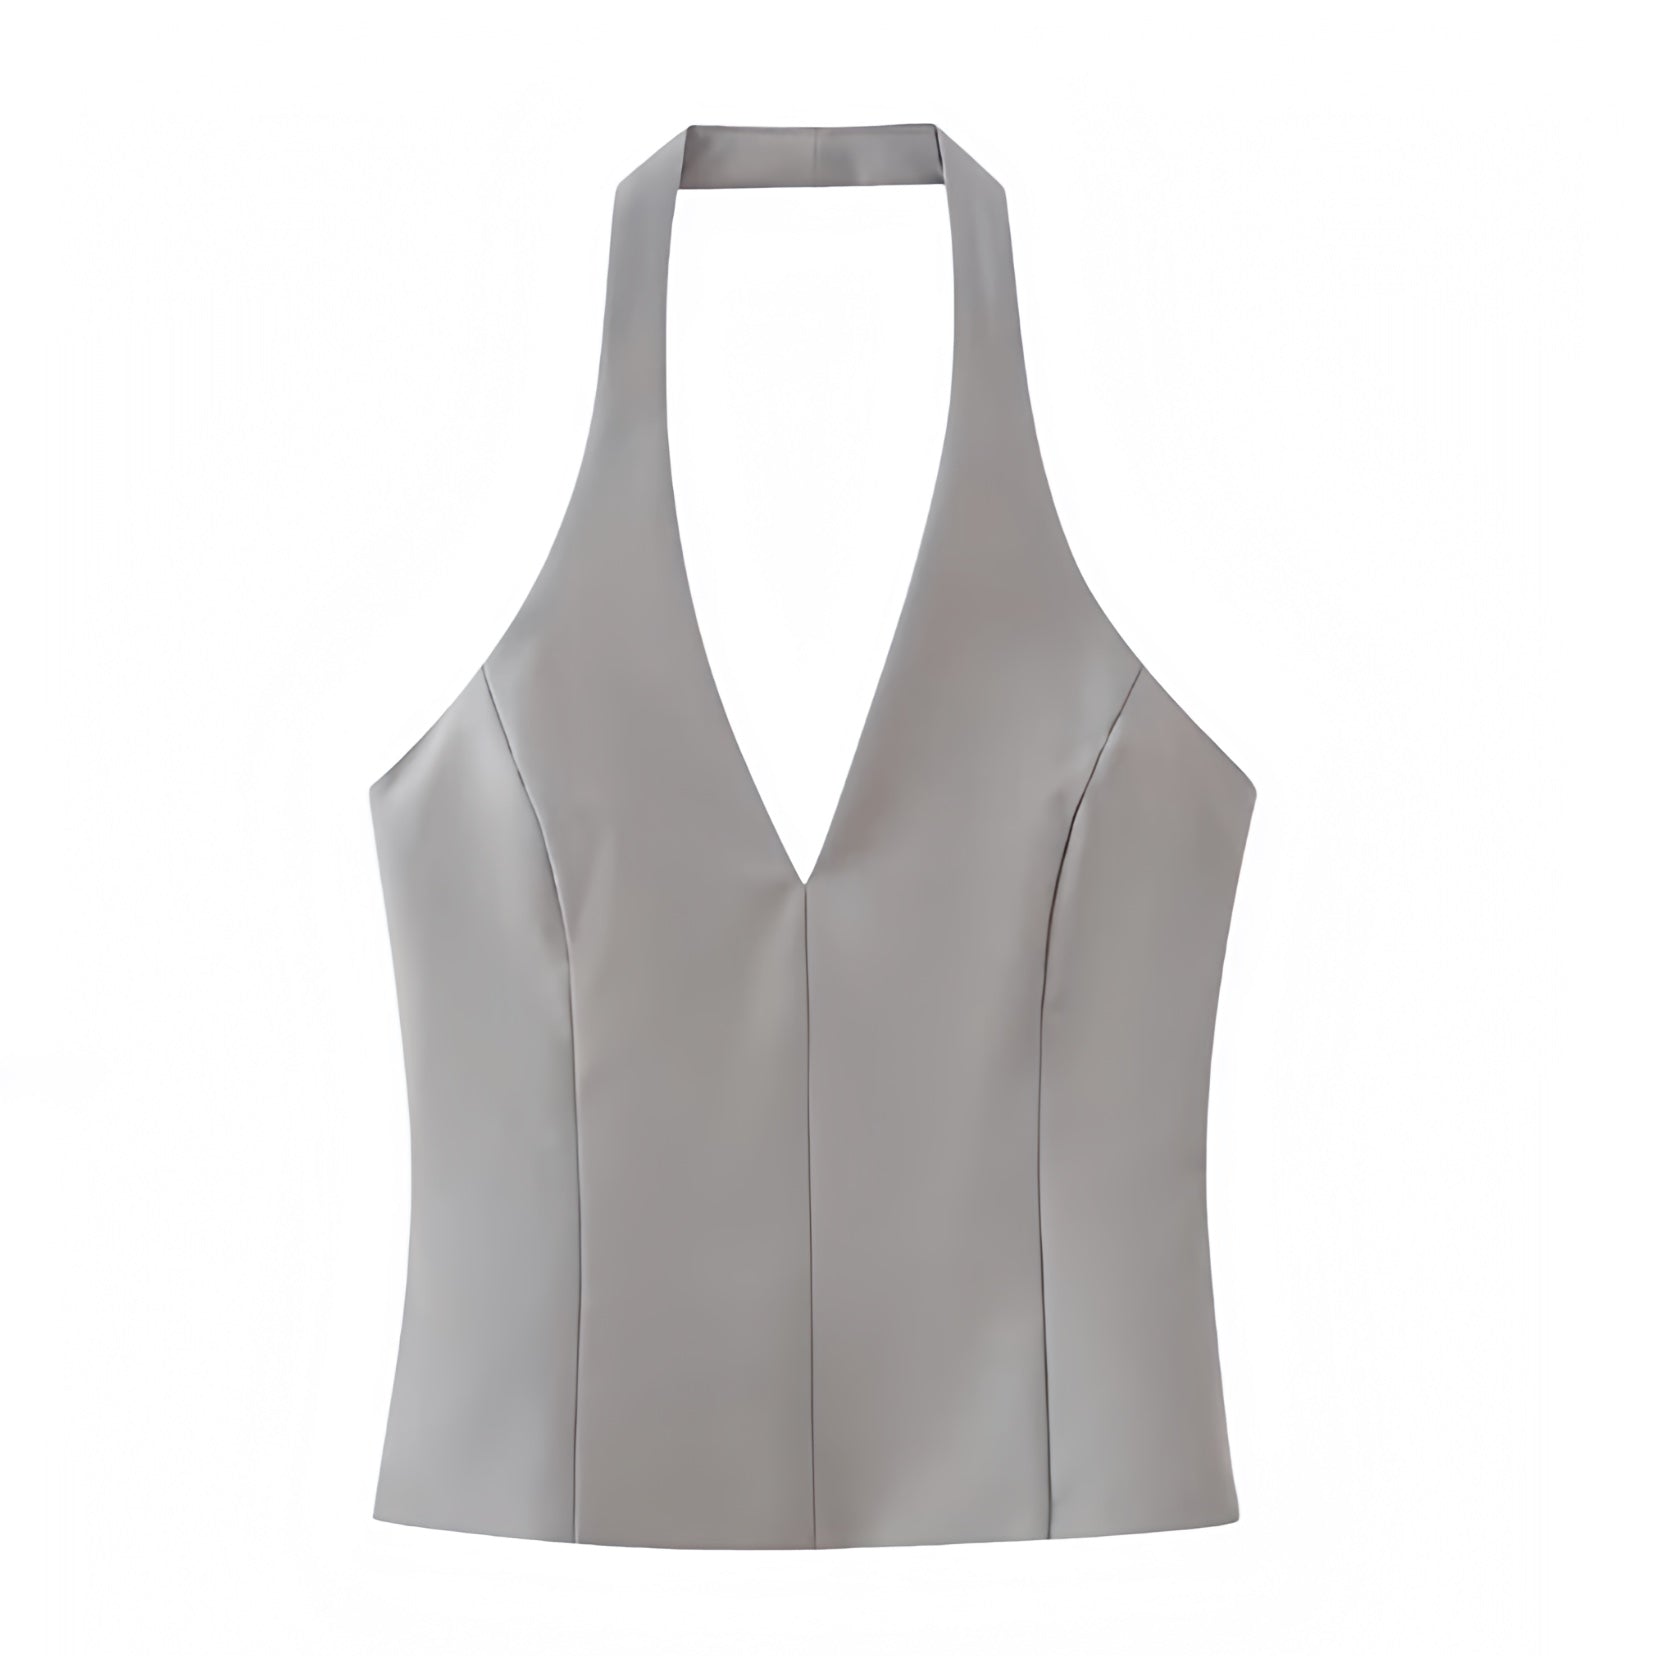 light-grey-gray-silver-bodycon-corset-pleated-v-neck-slim-fit-sleeveless-backless-open-back-cut-out-halter-crop-camisole-tank-top-blouse-women-ladies-chic-trendy-spring-2024-summer-elegant-casual-semi-formal-classy-feminine-party-date-night-out-sexy-club-wear-y2k-90s-minimalist-office-siren-style-zara-revolve-aritzia-white-fox-princess-polly-babyboo-iamgia-edikted-fenity